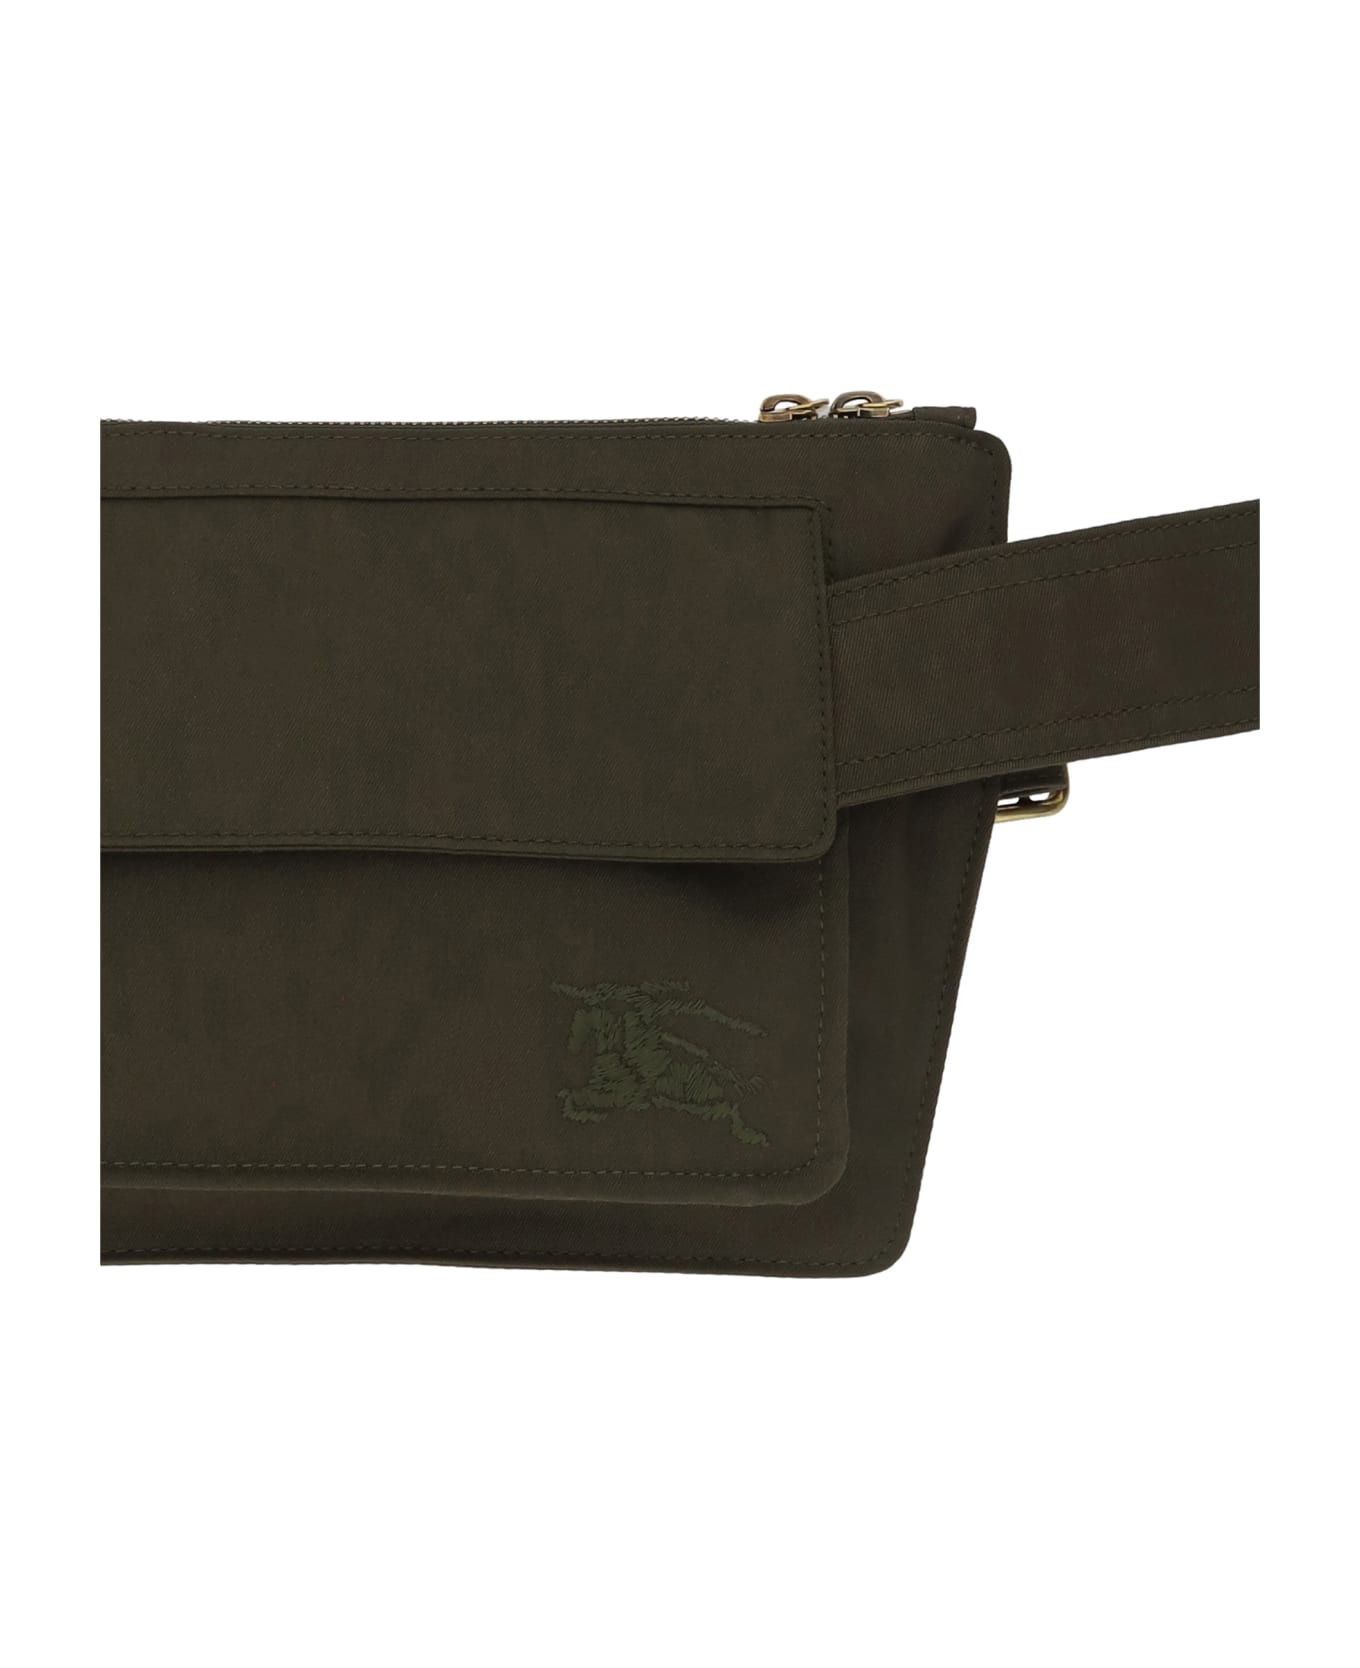 Burberry Trench Fanny Pack - Military ベルトバッグ